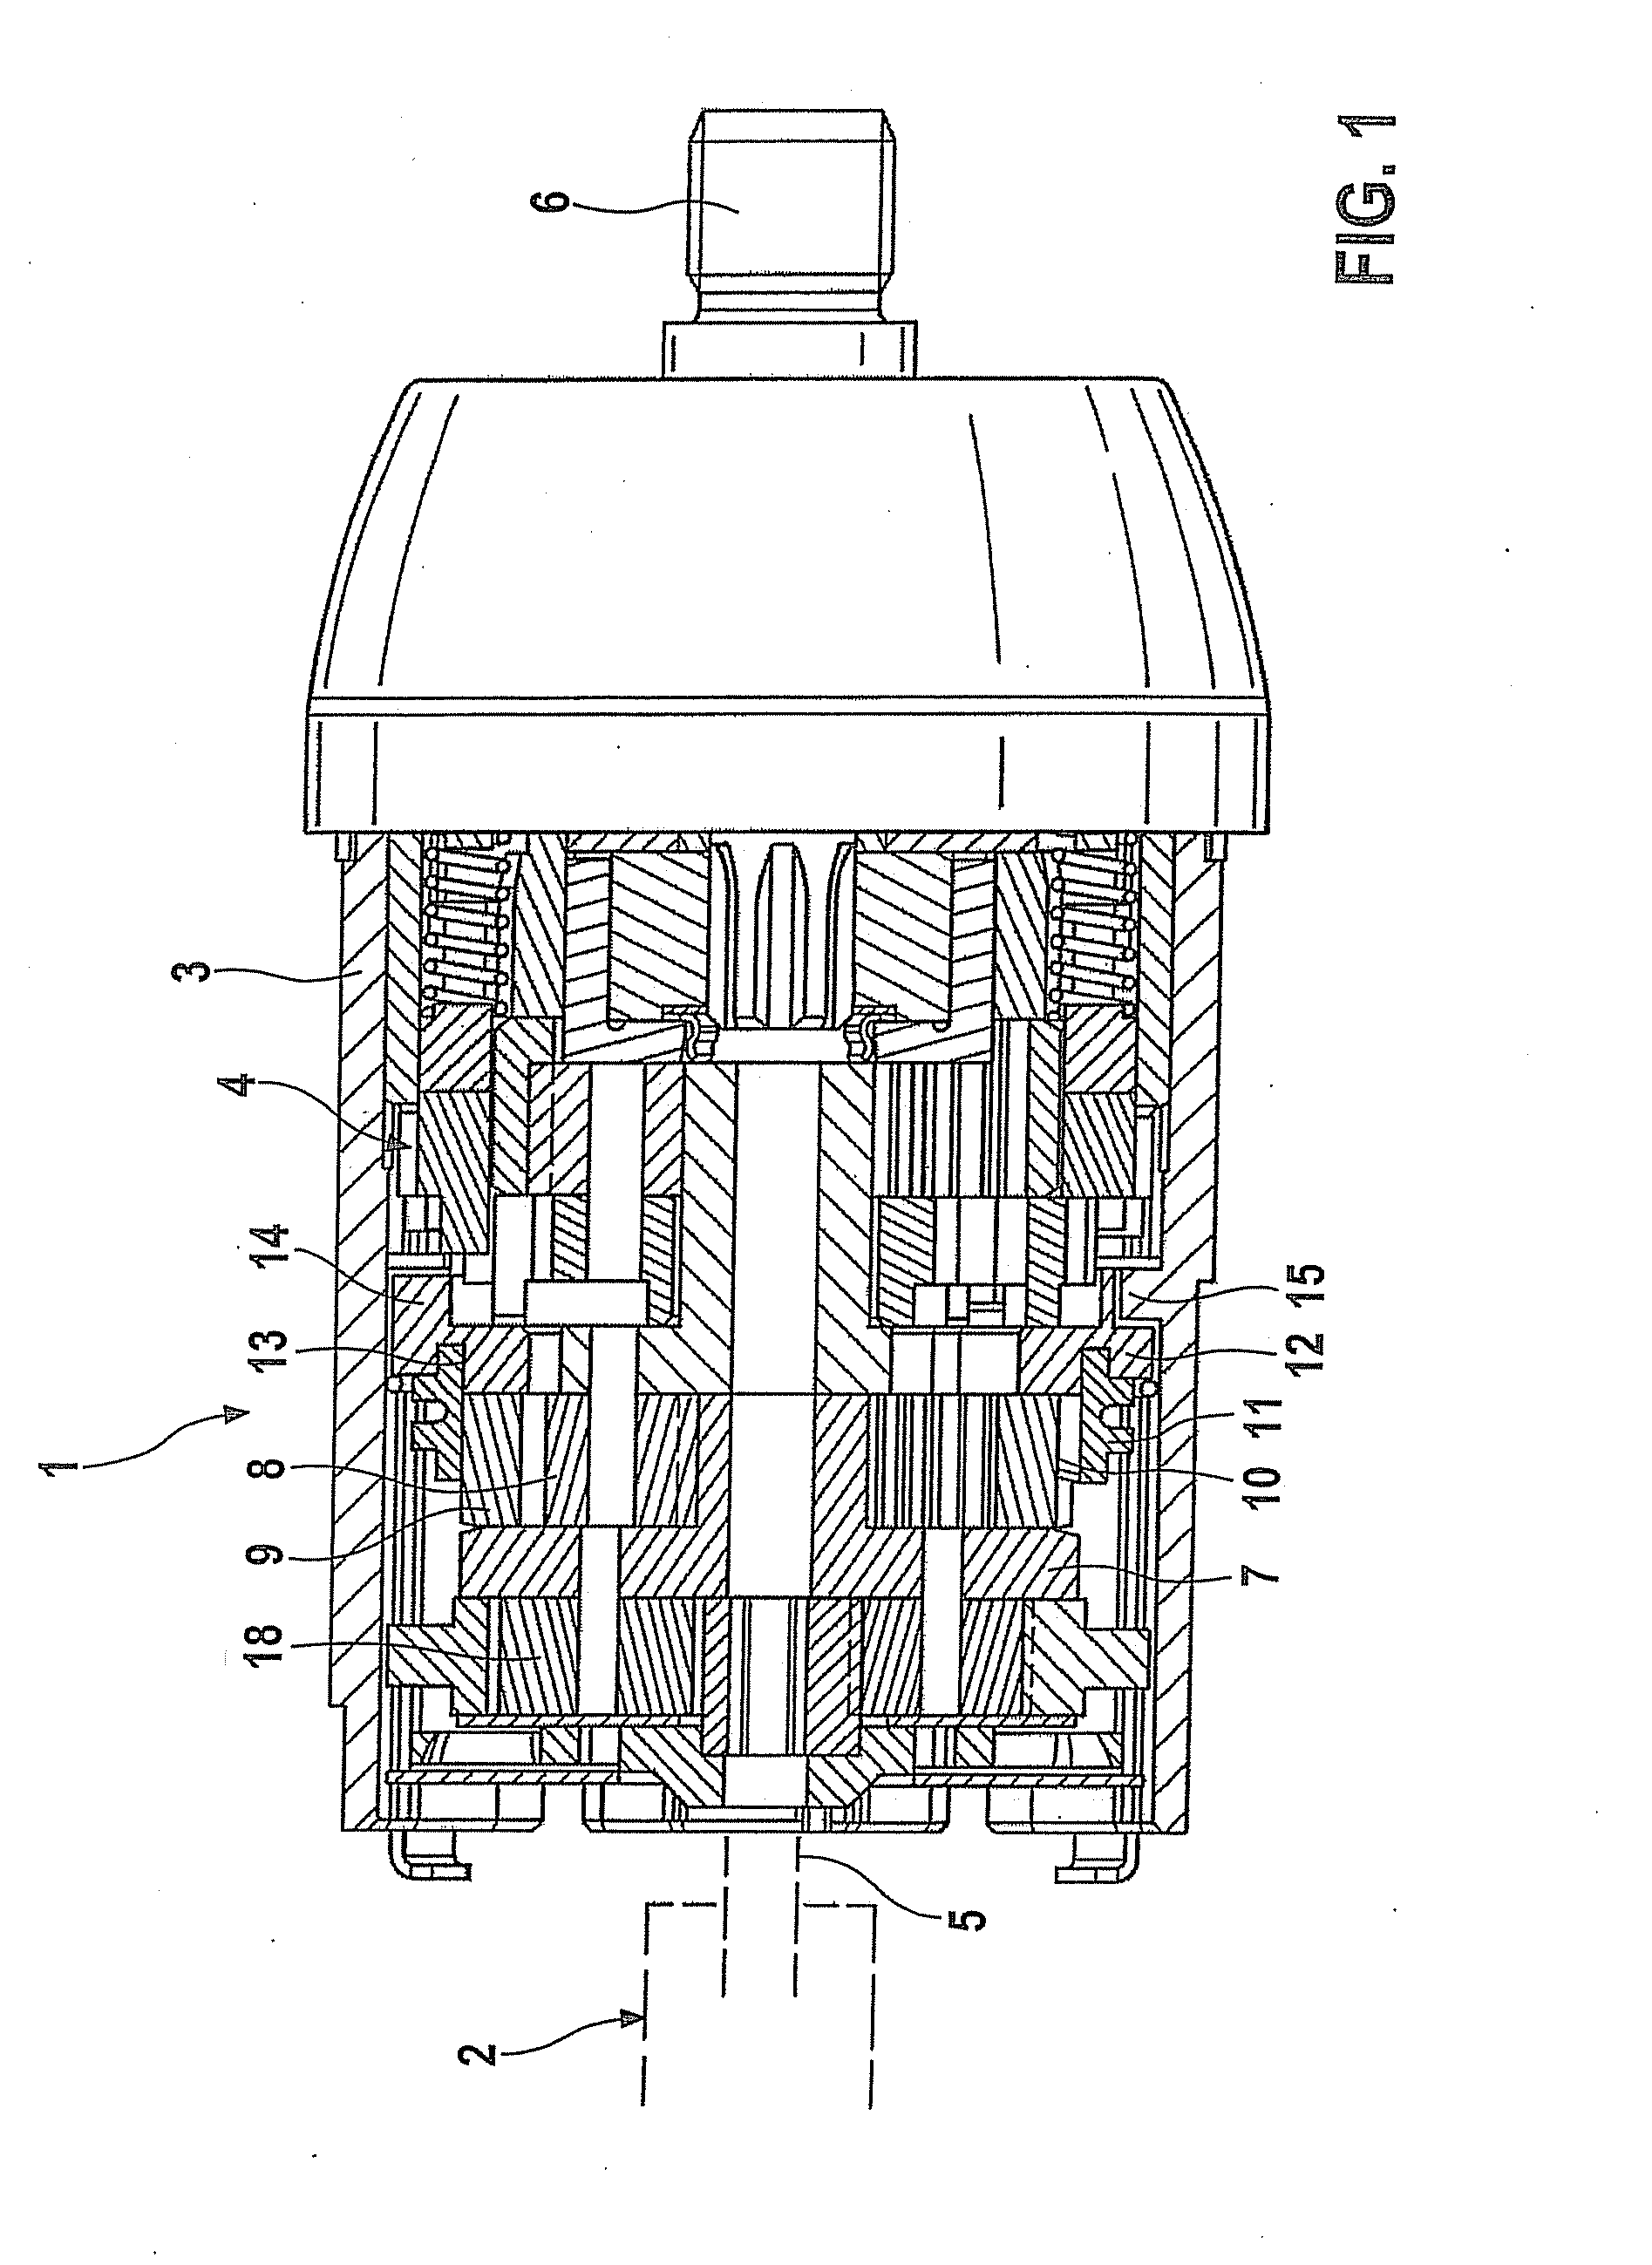 Handheld power tool having a switchable gear